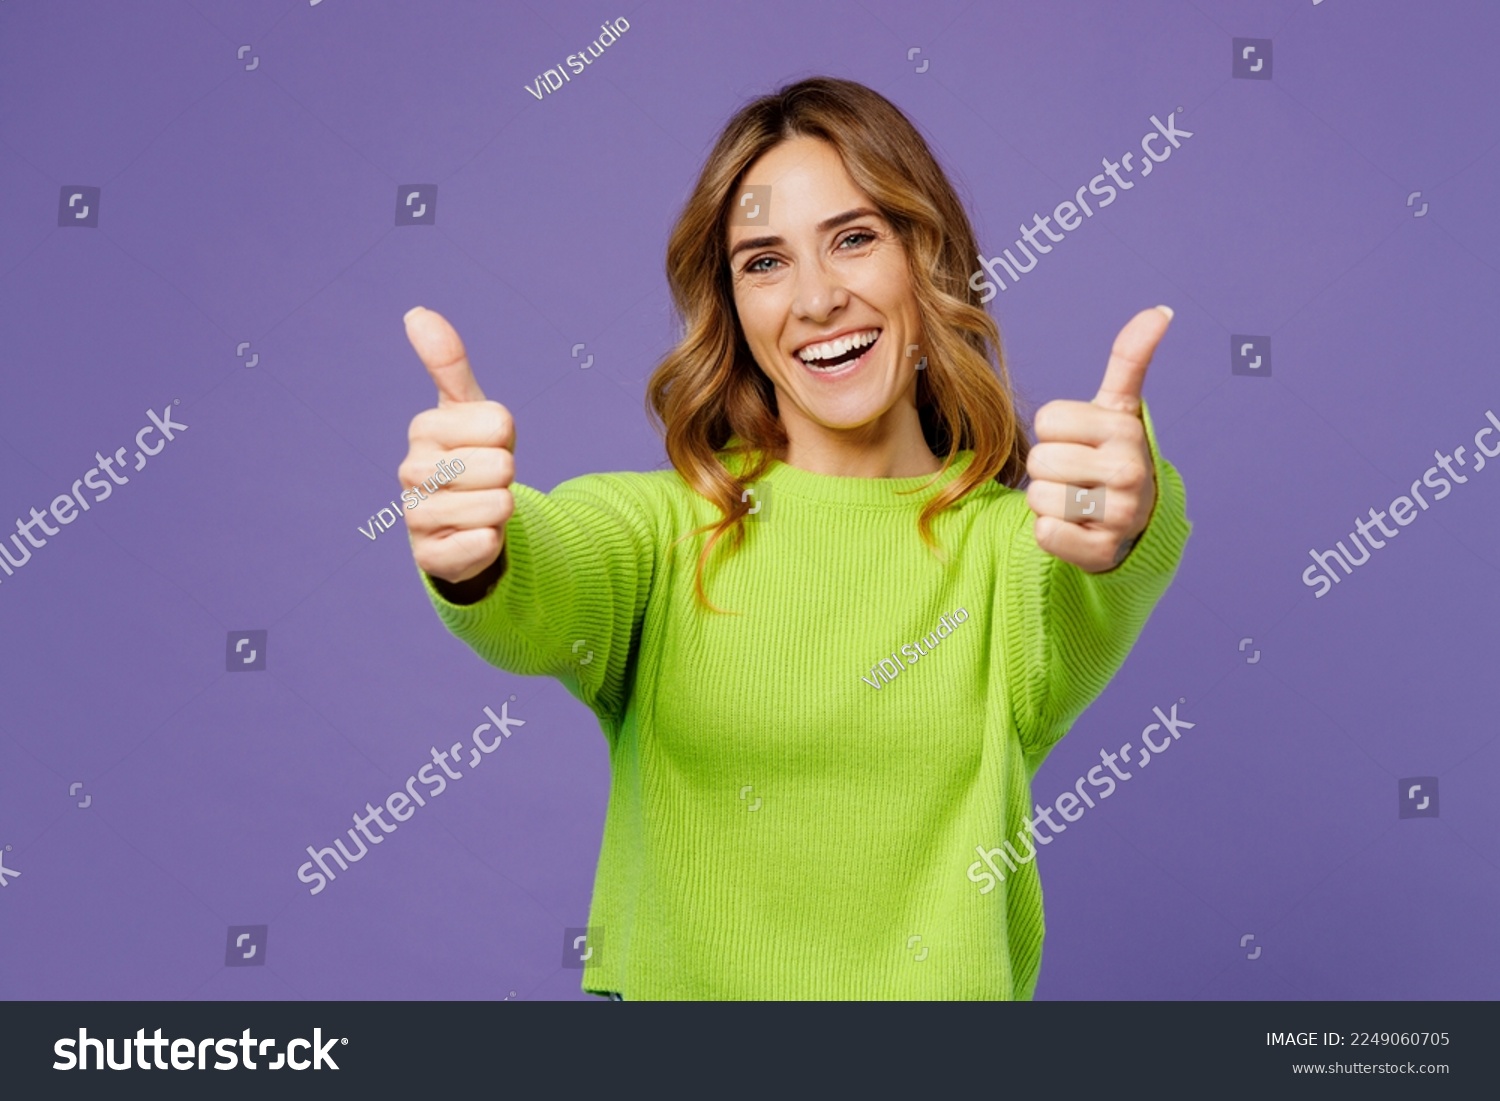 Young smiling fun cool positive woman 30s she wearing casual green knitted sweater showing thumb up like gesture isolated on plain pastel purple background studio portrait. People lifestyle concept #2249060705